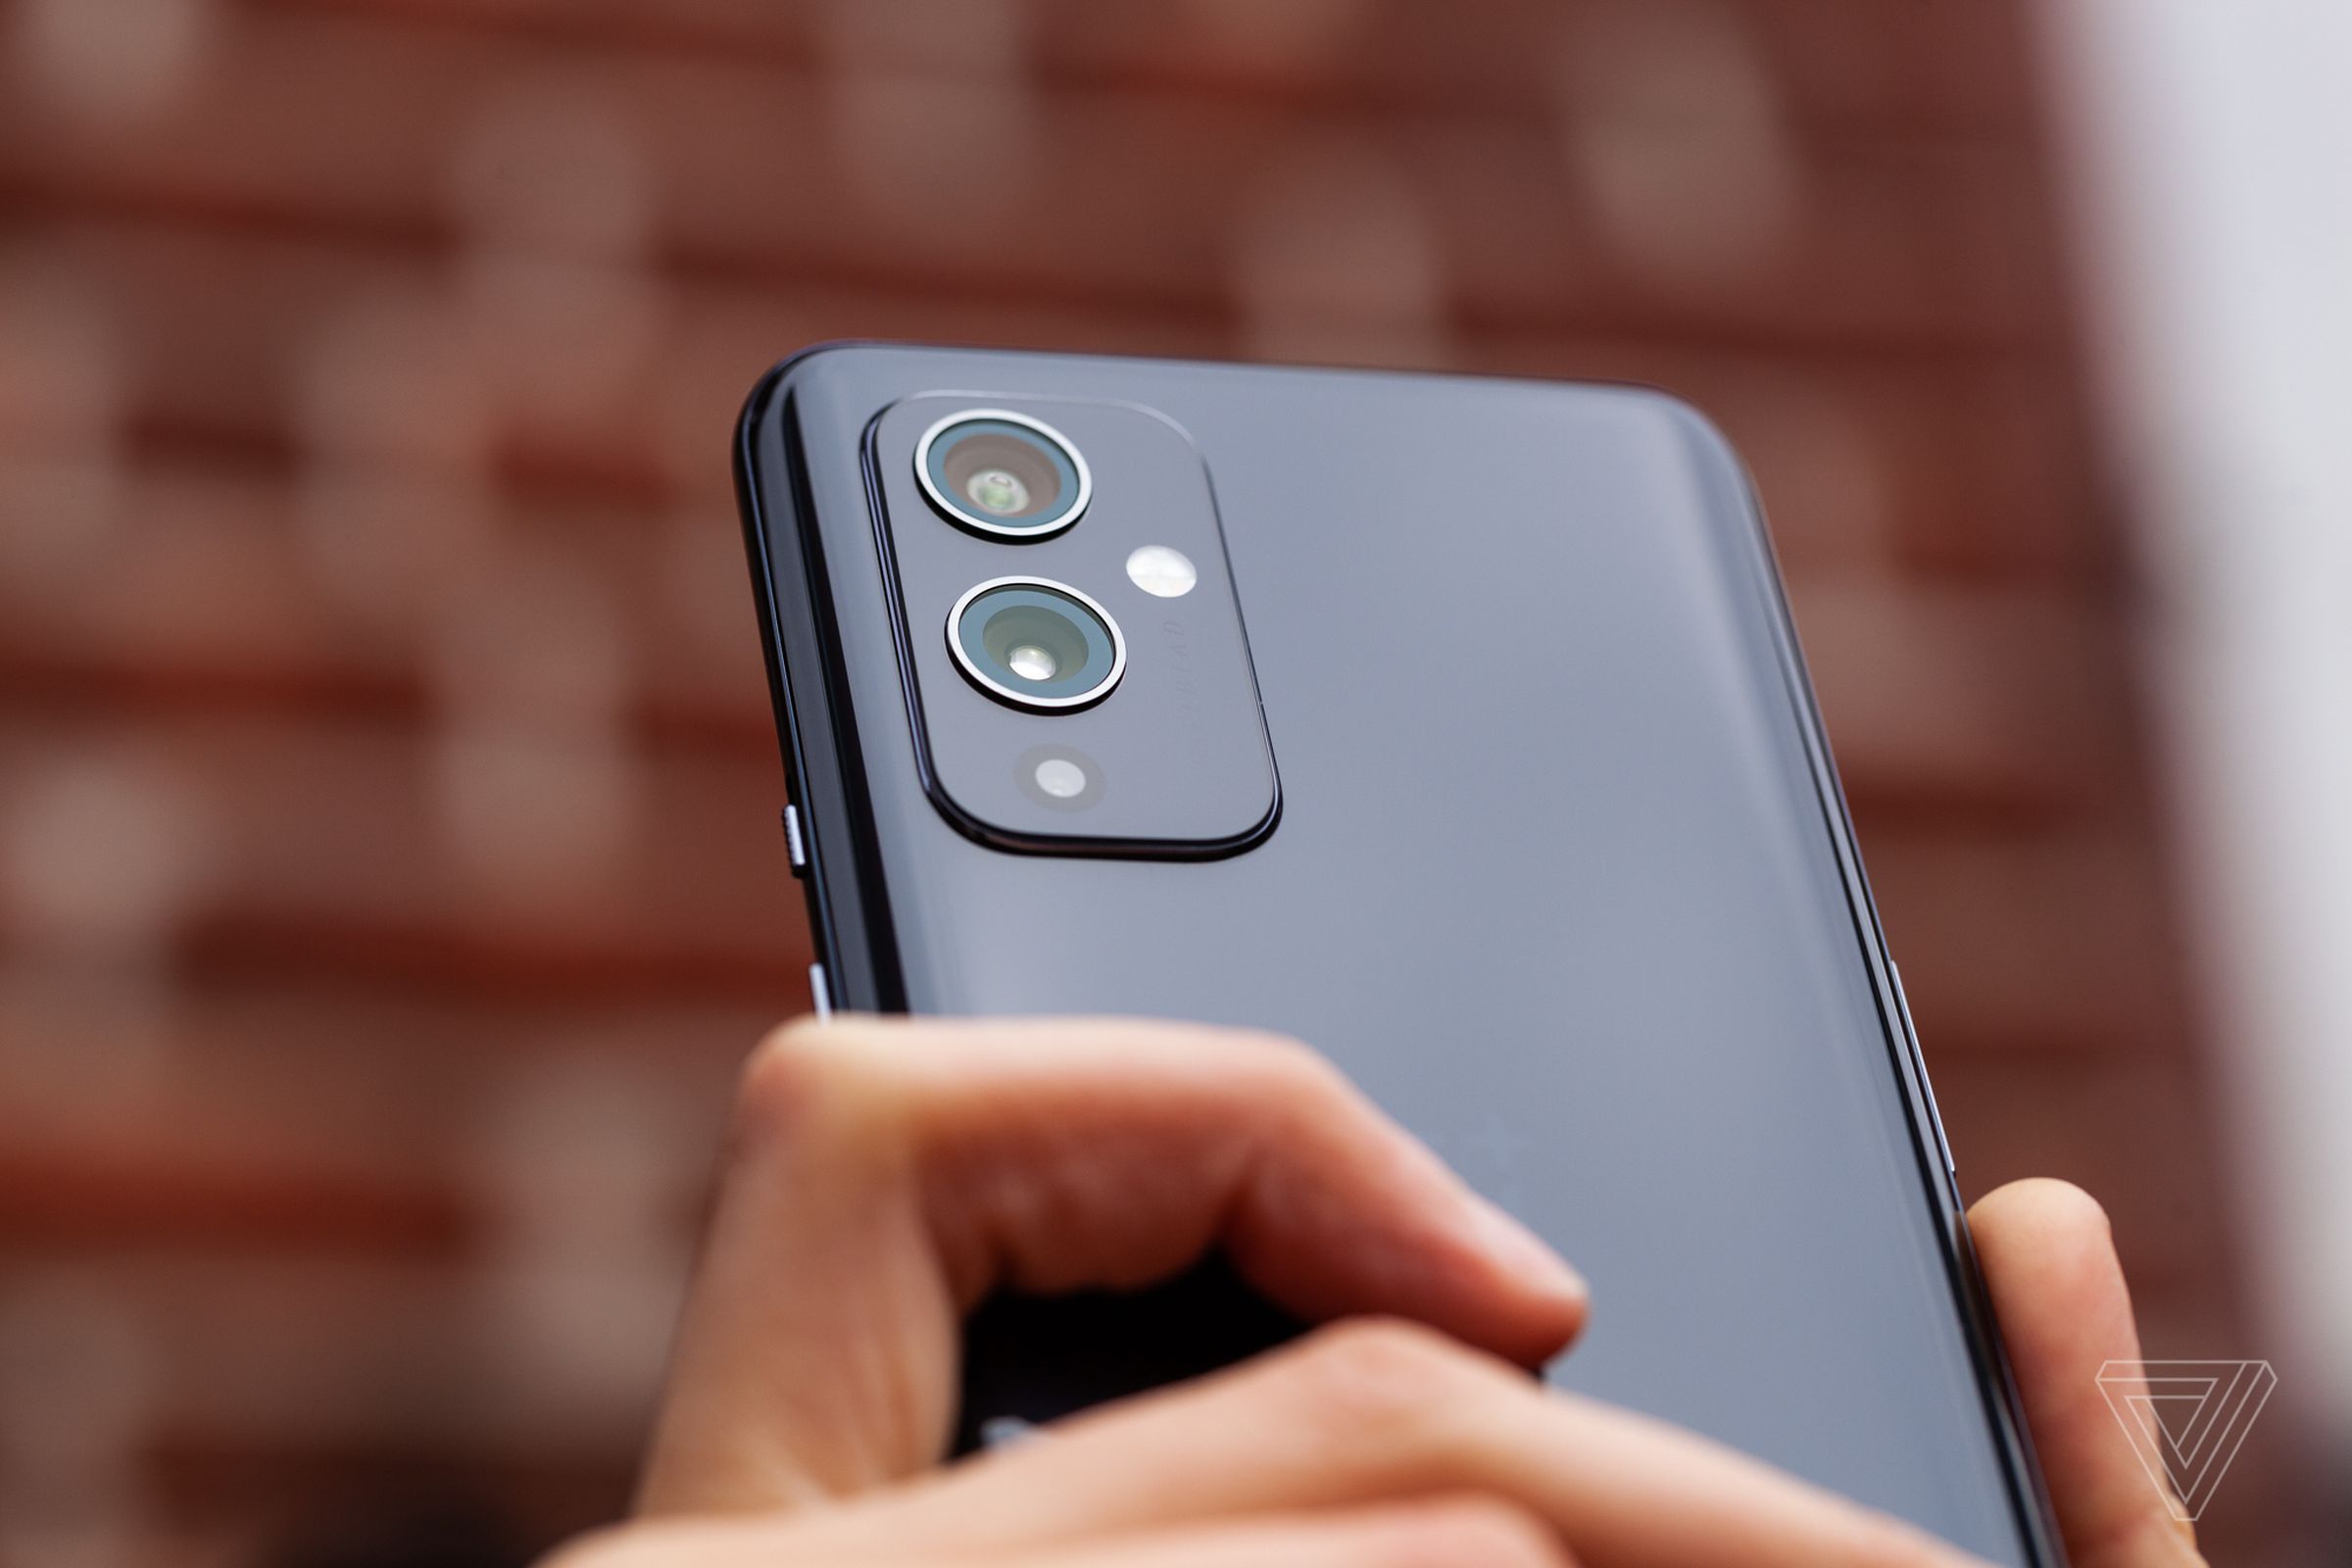 The 9 features main and ultrawide rear cameras, plus a monochrome sensor for additional black-and-white information.